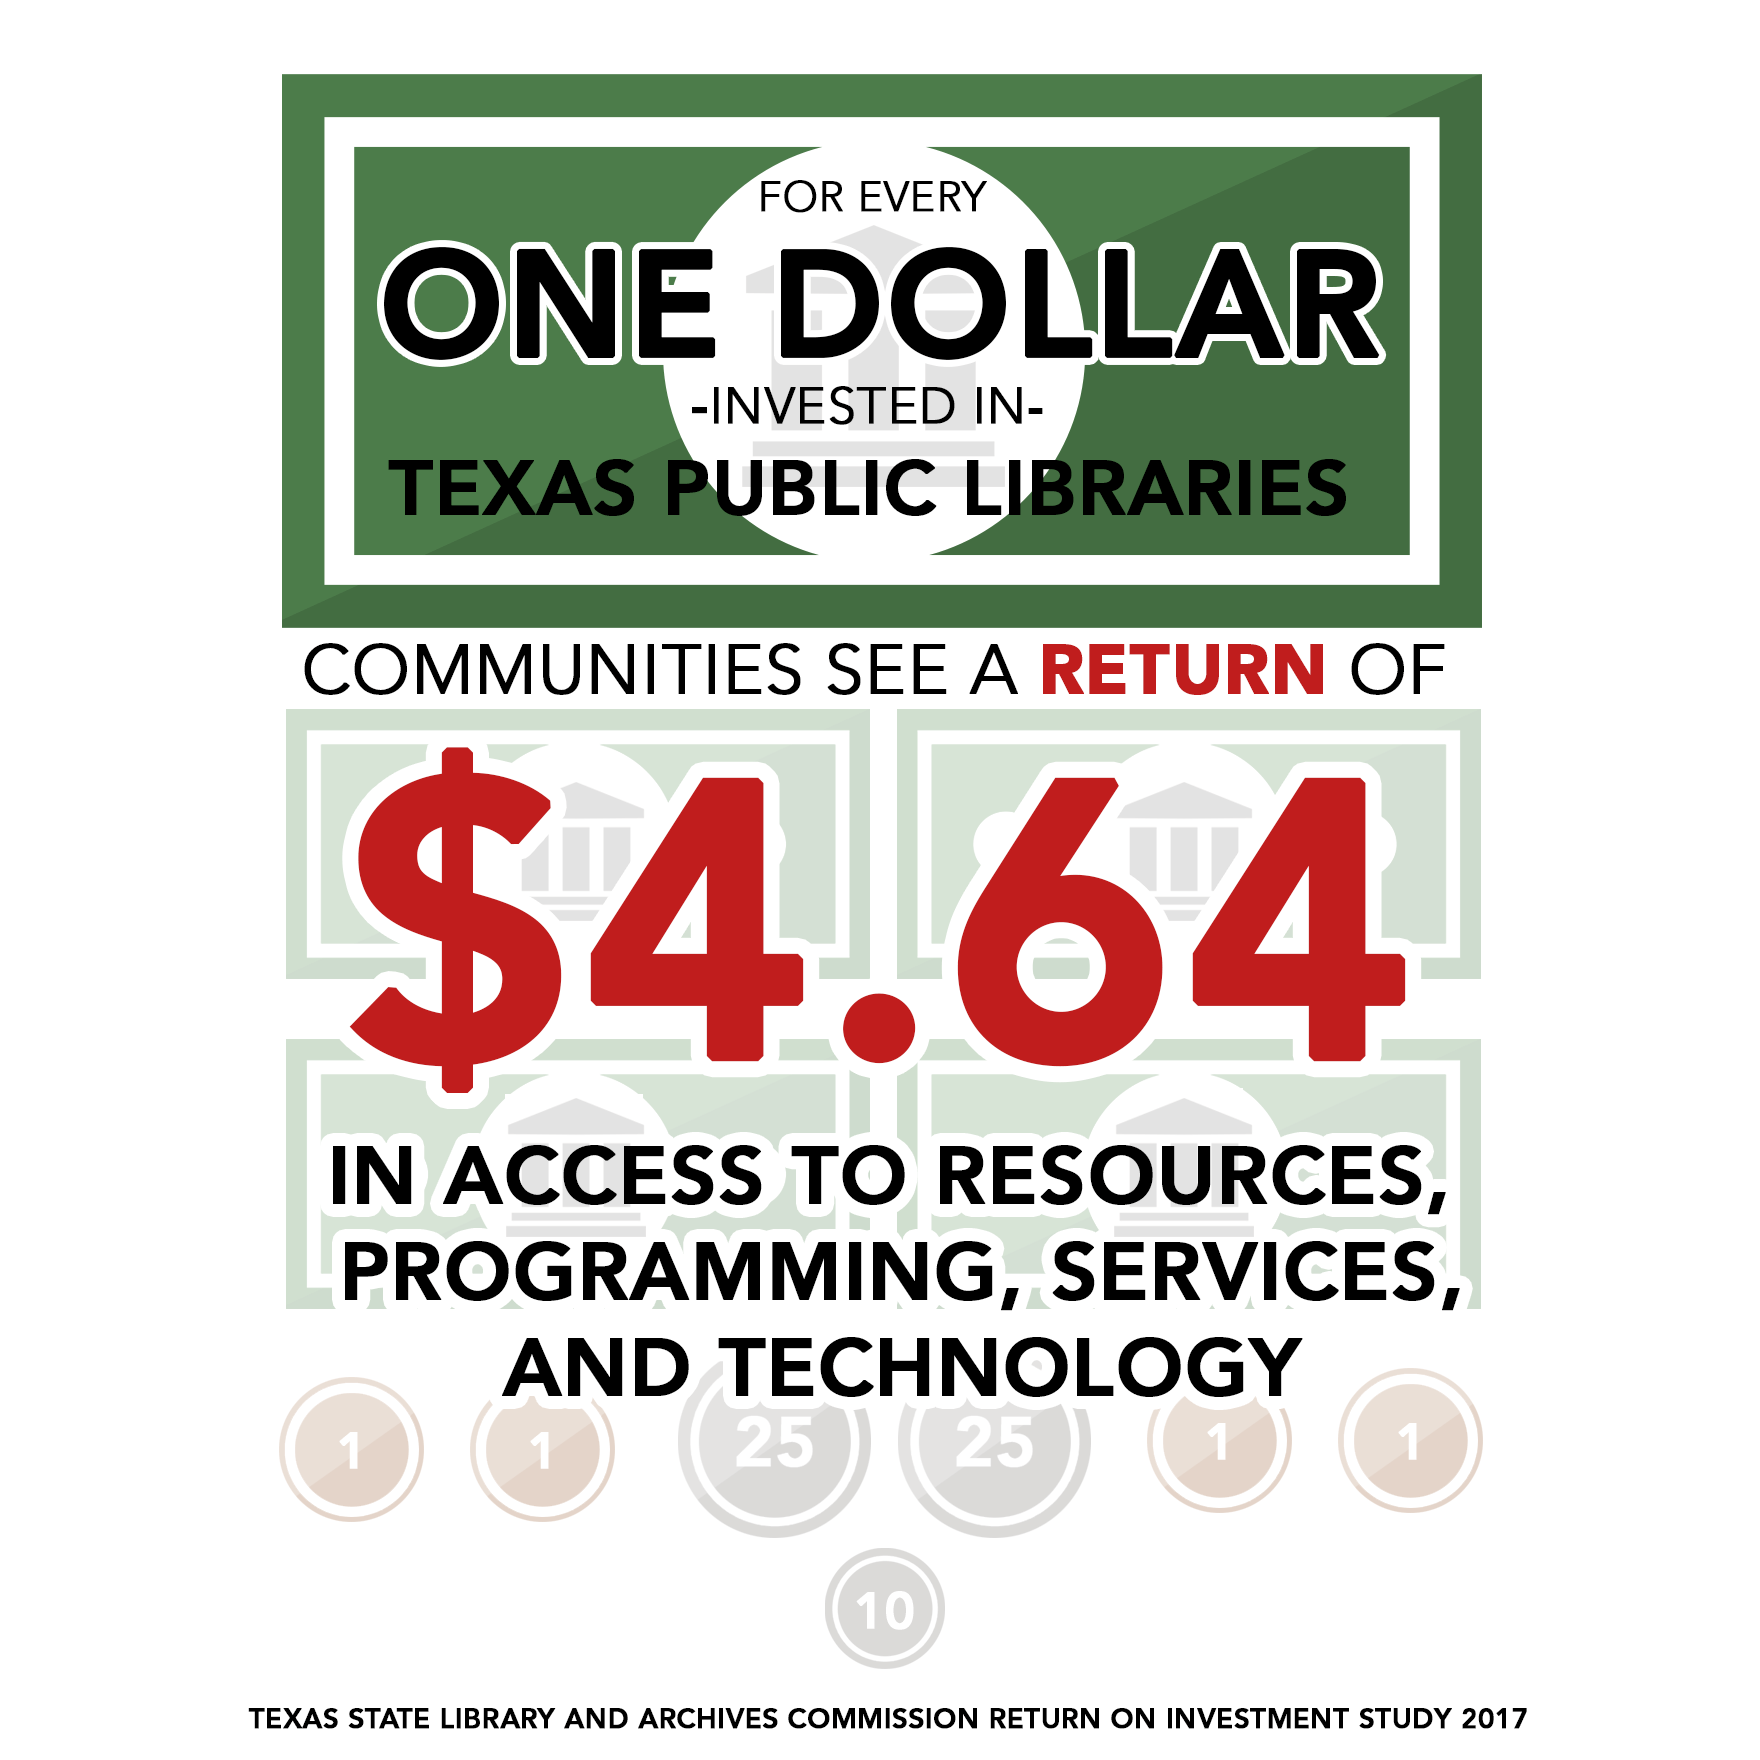 For every one dollar invested in Texas Public Libraries communities see a return of $4.64 in access to resources, programming, services, and technology